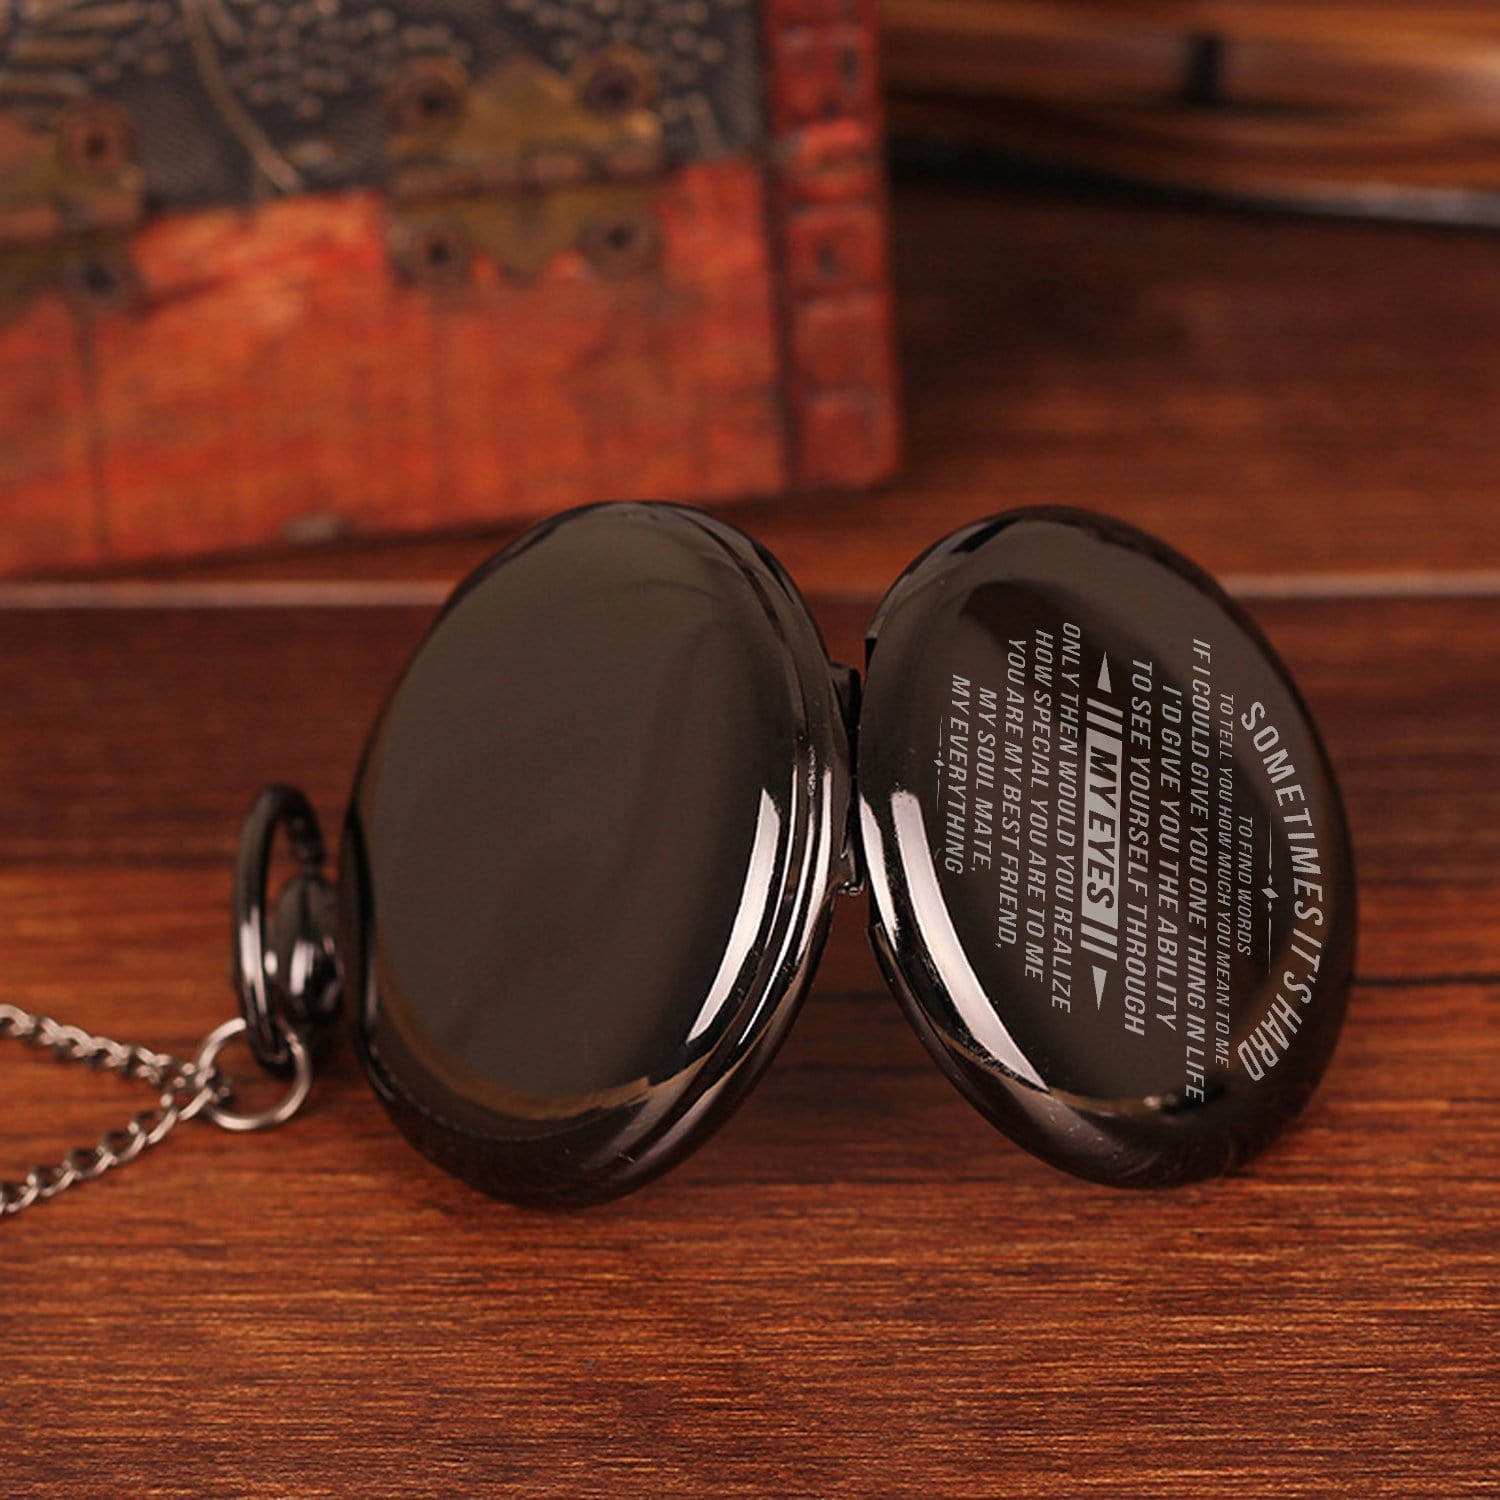 Pocket Watches To My Husband - See Yourself Through My Eyes Pocket Watch GiveMe-Gifts